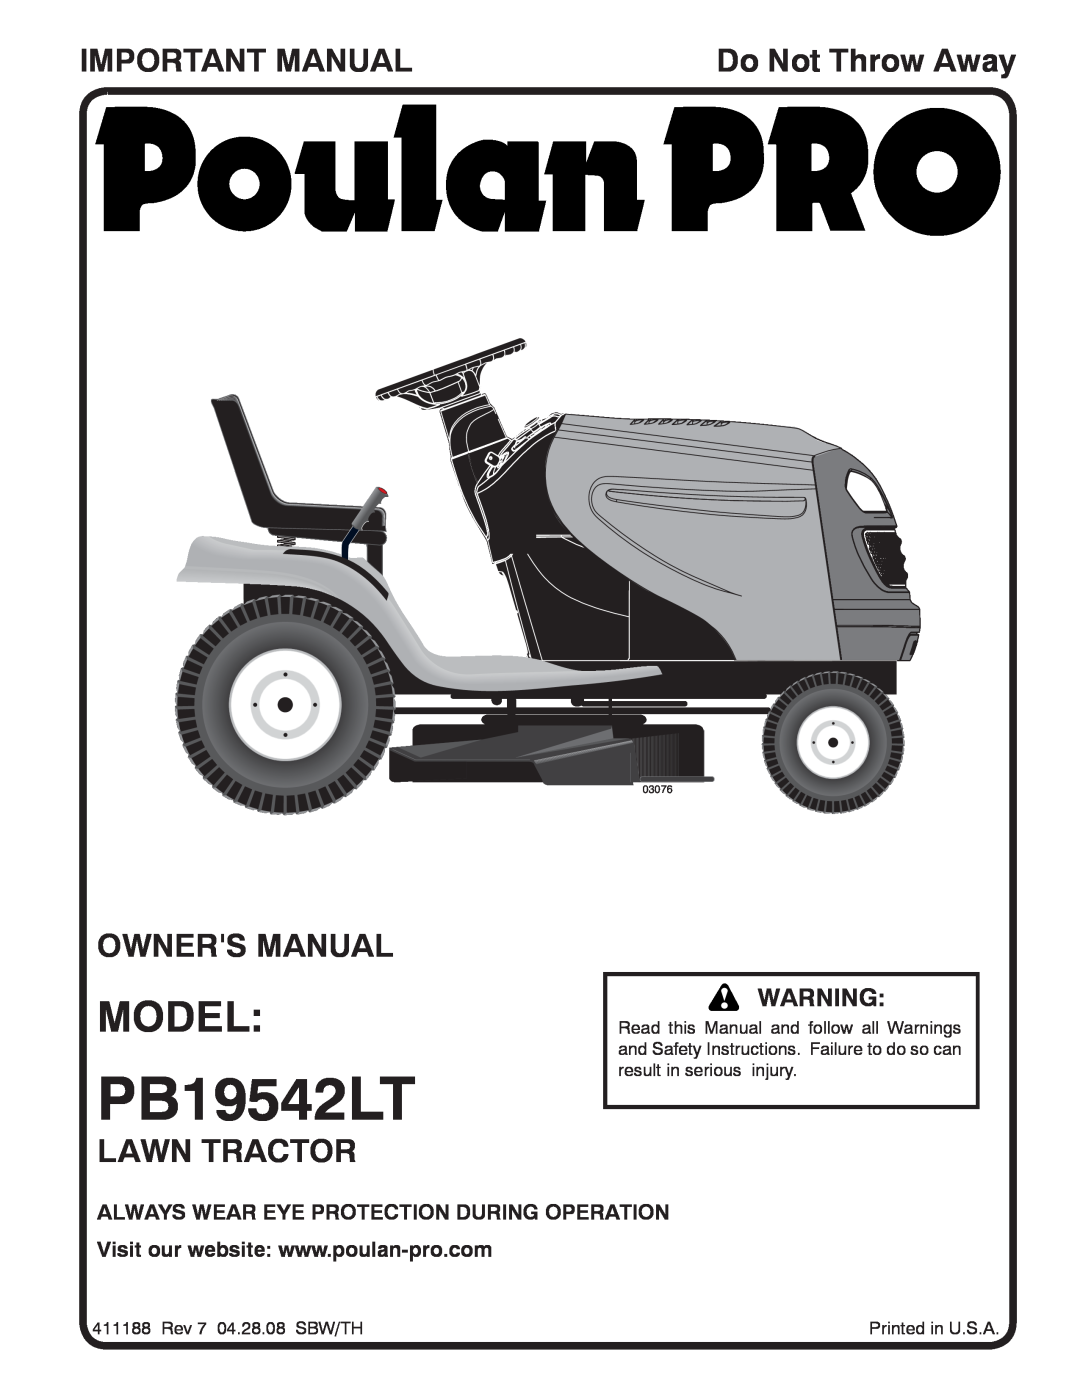 Poulan 96042002400 owner manual Model, Important Manual, Lawn Tractor, PB19542LT, Do Not Throw Away 